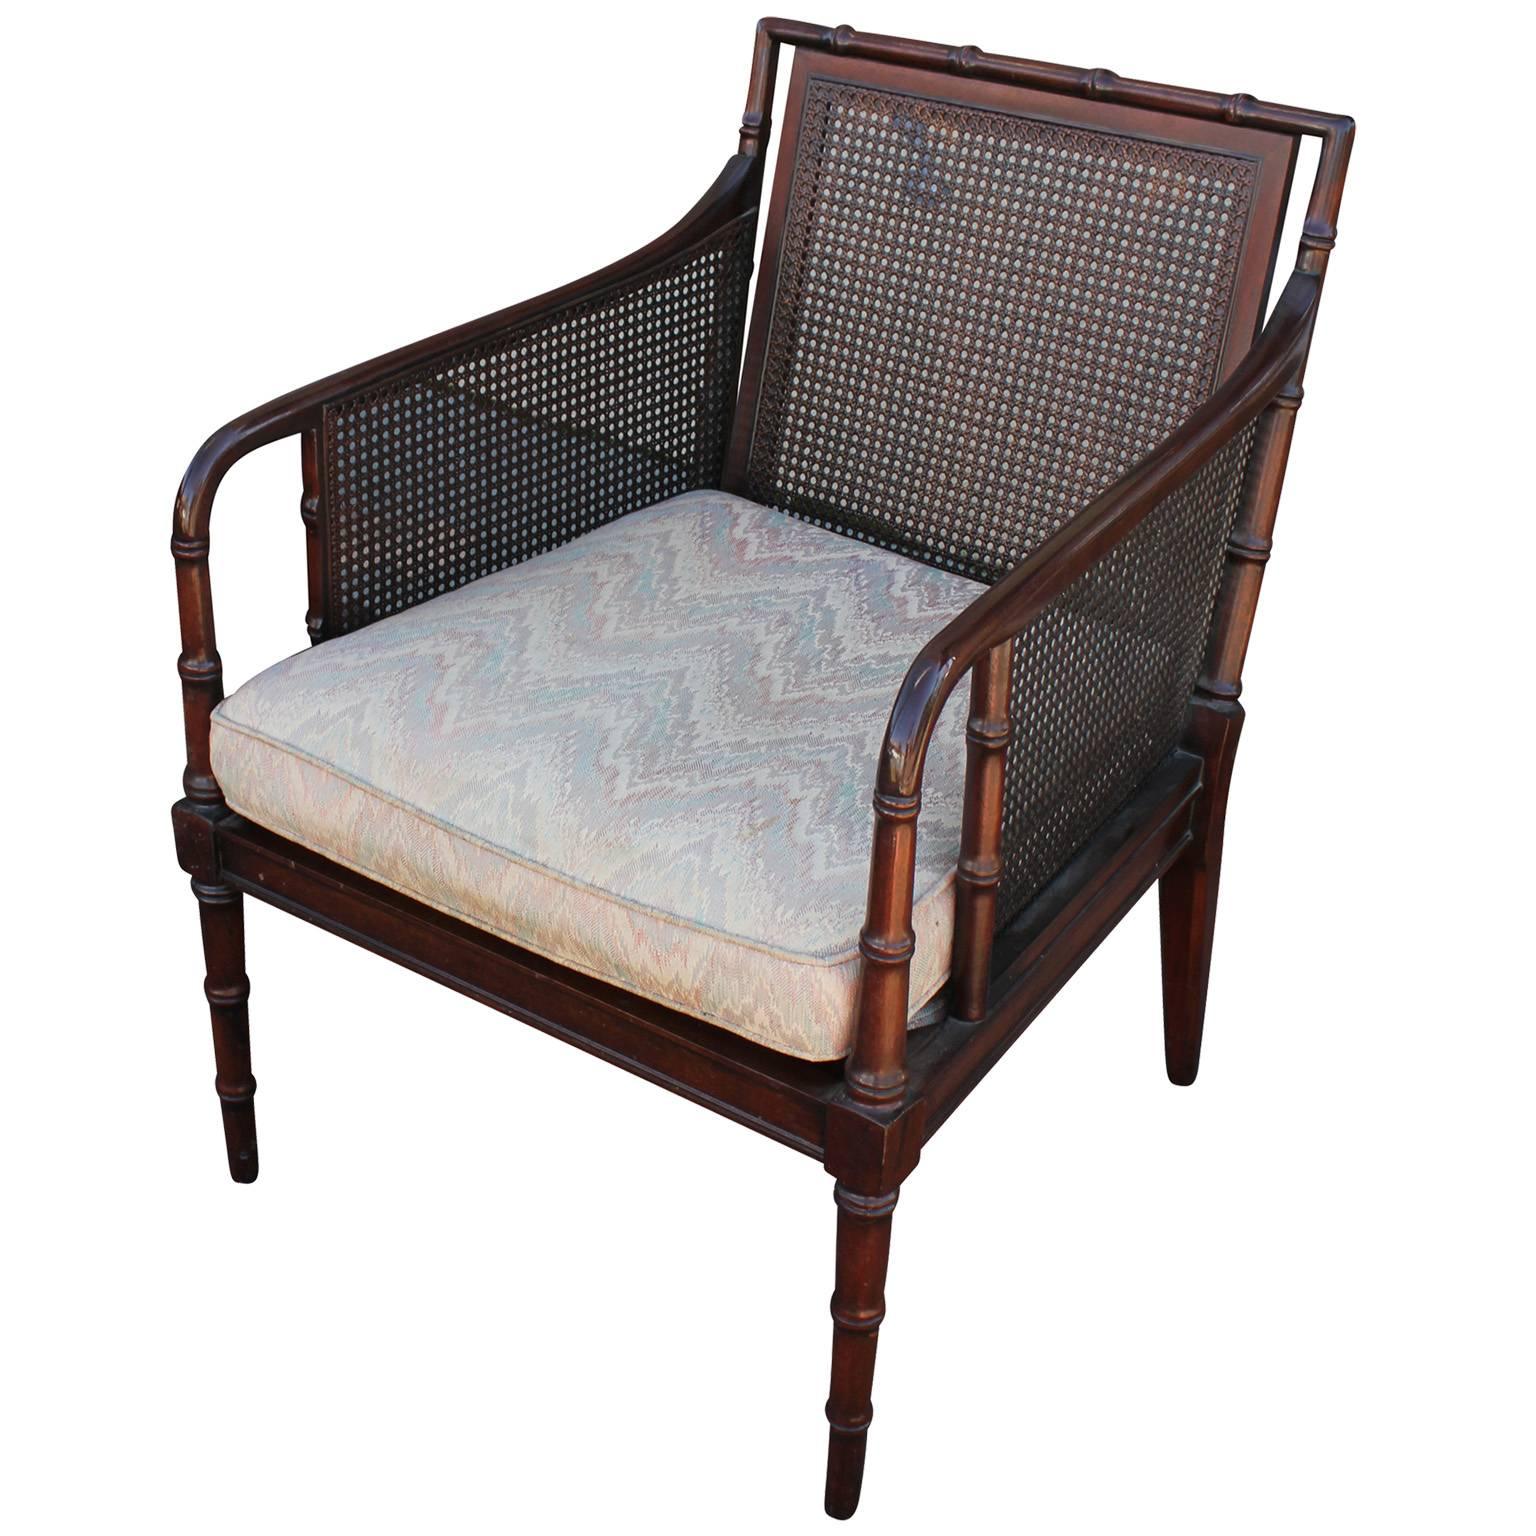 Elegant pair of Regency style lounge chairs. Faux bamboo frame has simple curved lines. Seat back and arms are covered in cane. Seats are upholstered in a vintage chevron fabric which needs to be updated. The chairs are very well constructed and